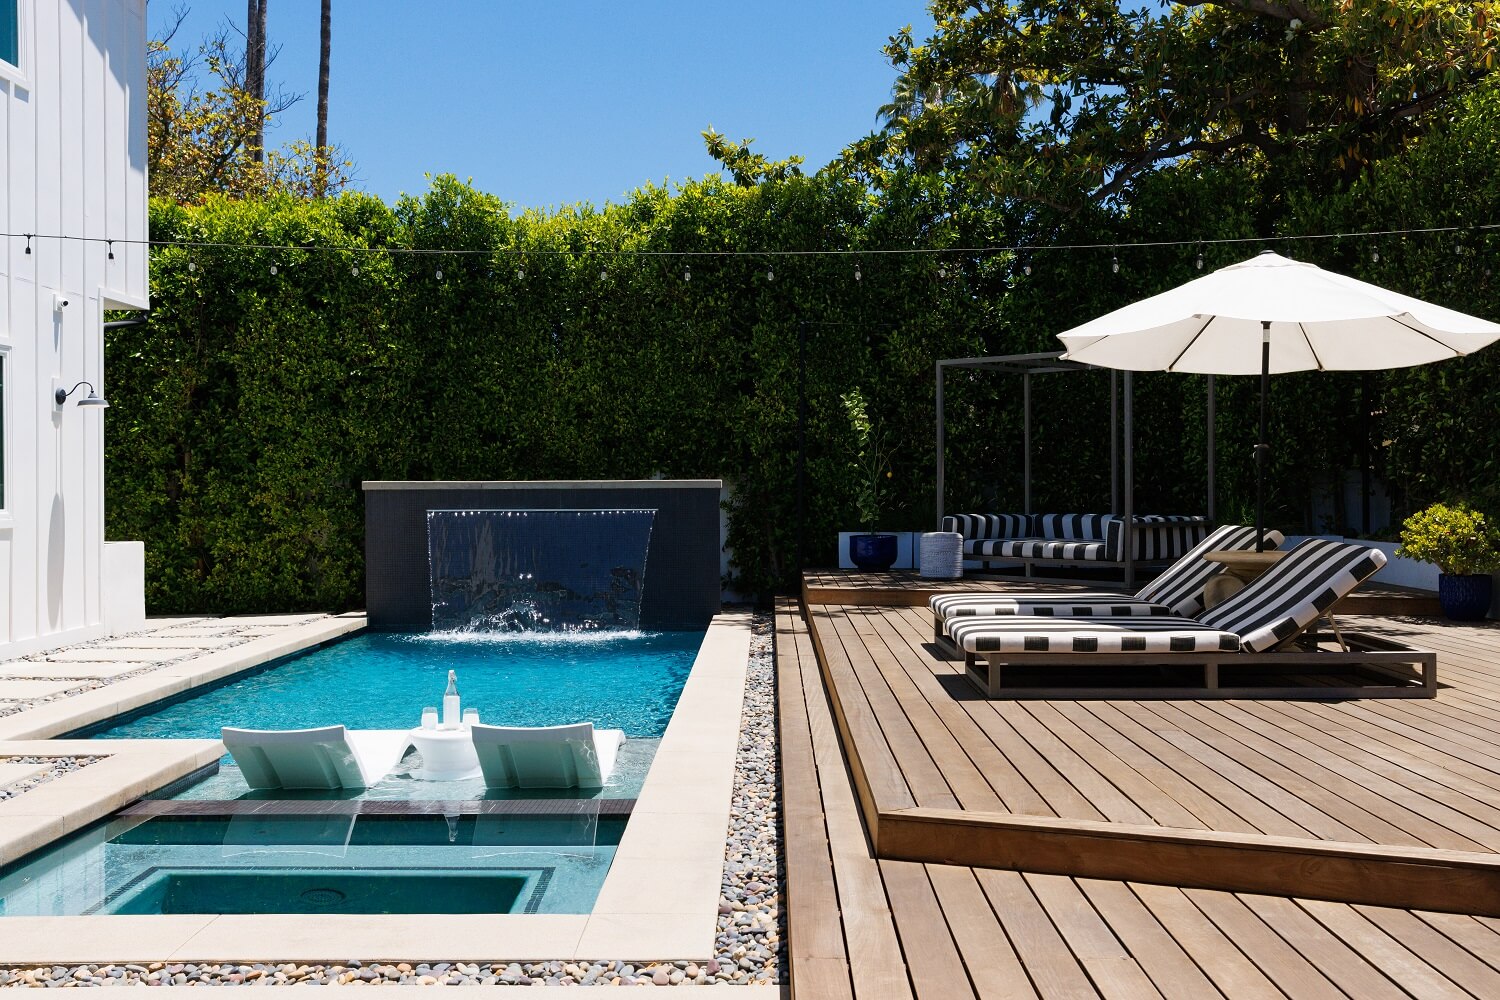 garden-swimming-pool-wooden-terrace-los-angeles-home-daveed-diggs-emmy-raver-lampman-nordroom